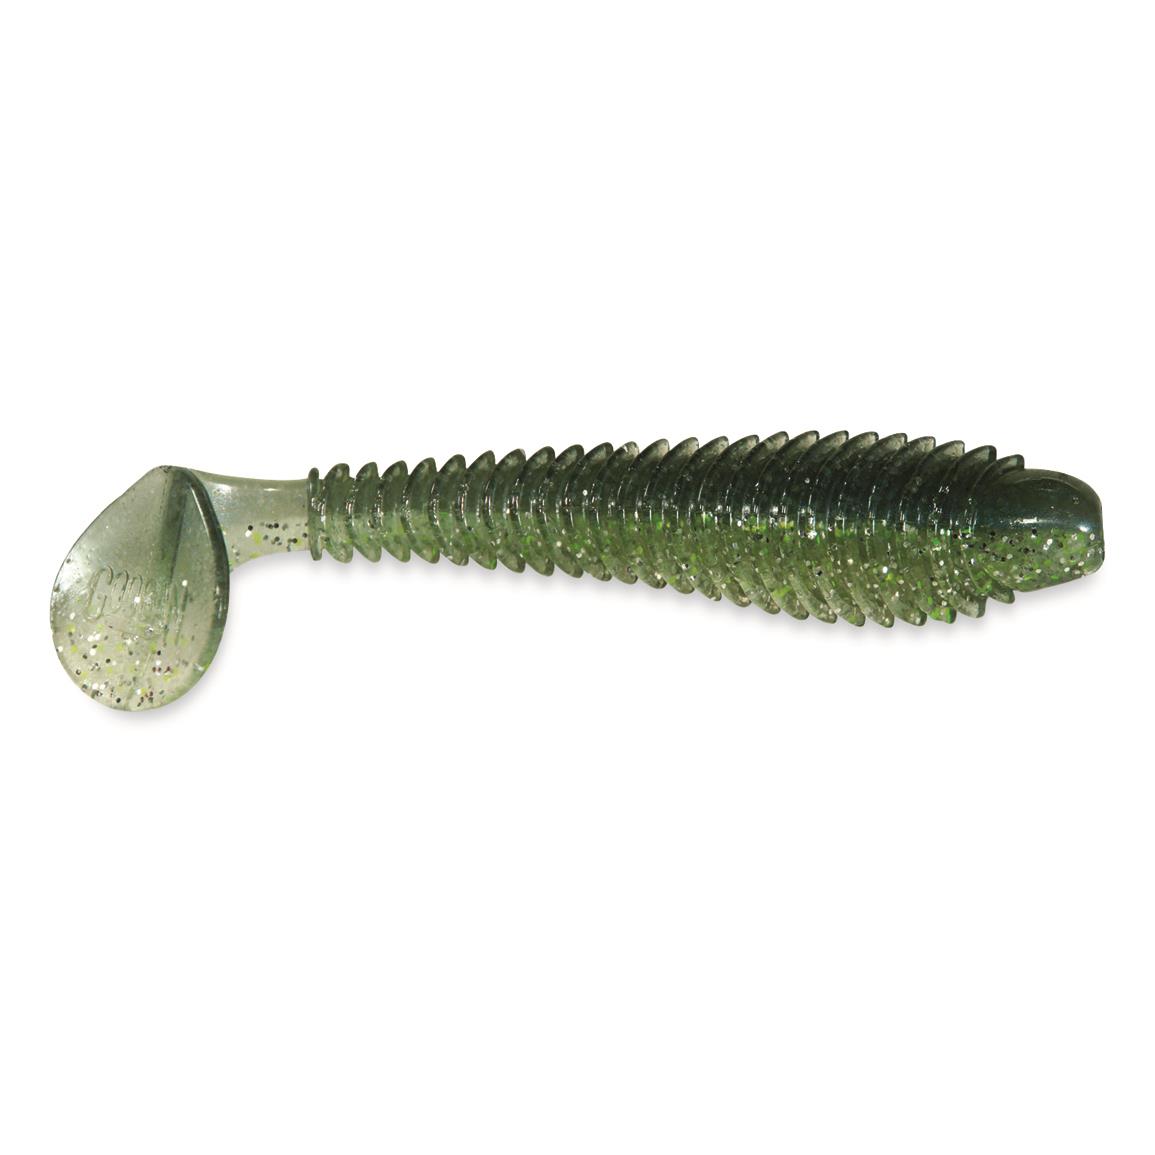 Googan Baits Saucy Swimmer, 2.8", 9 Pack, Sexy Shimmer